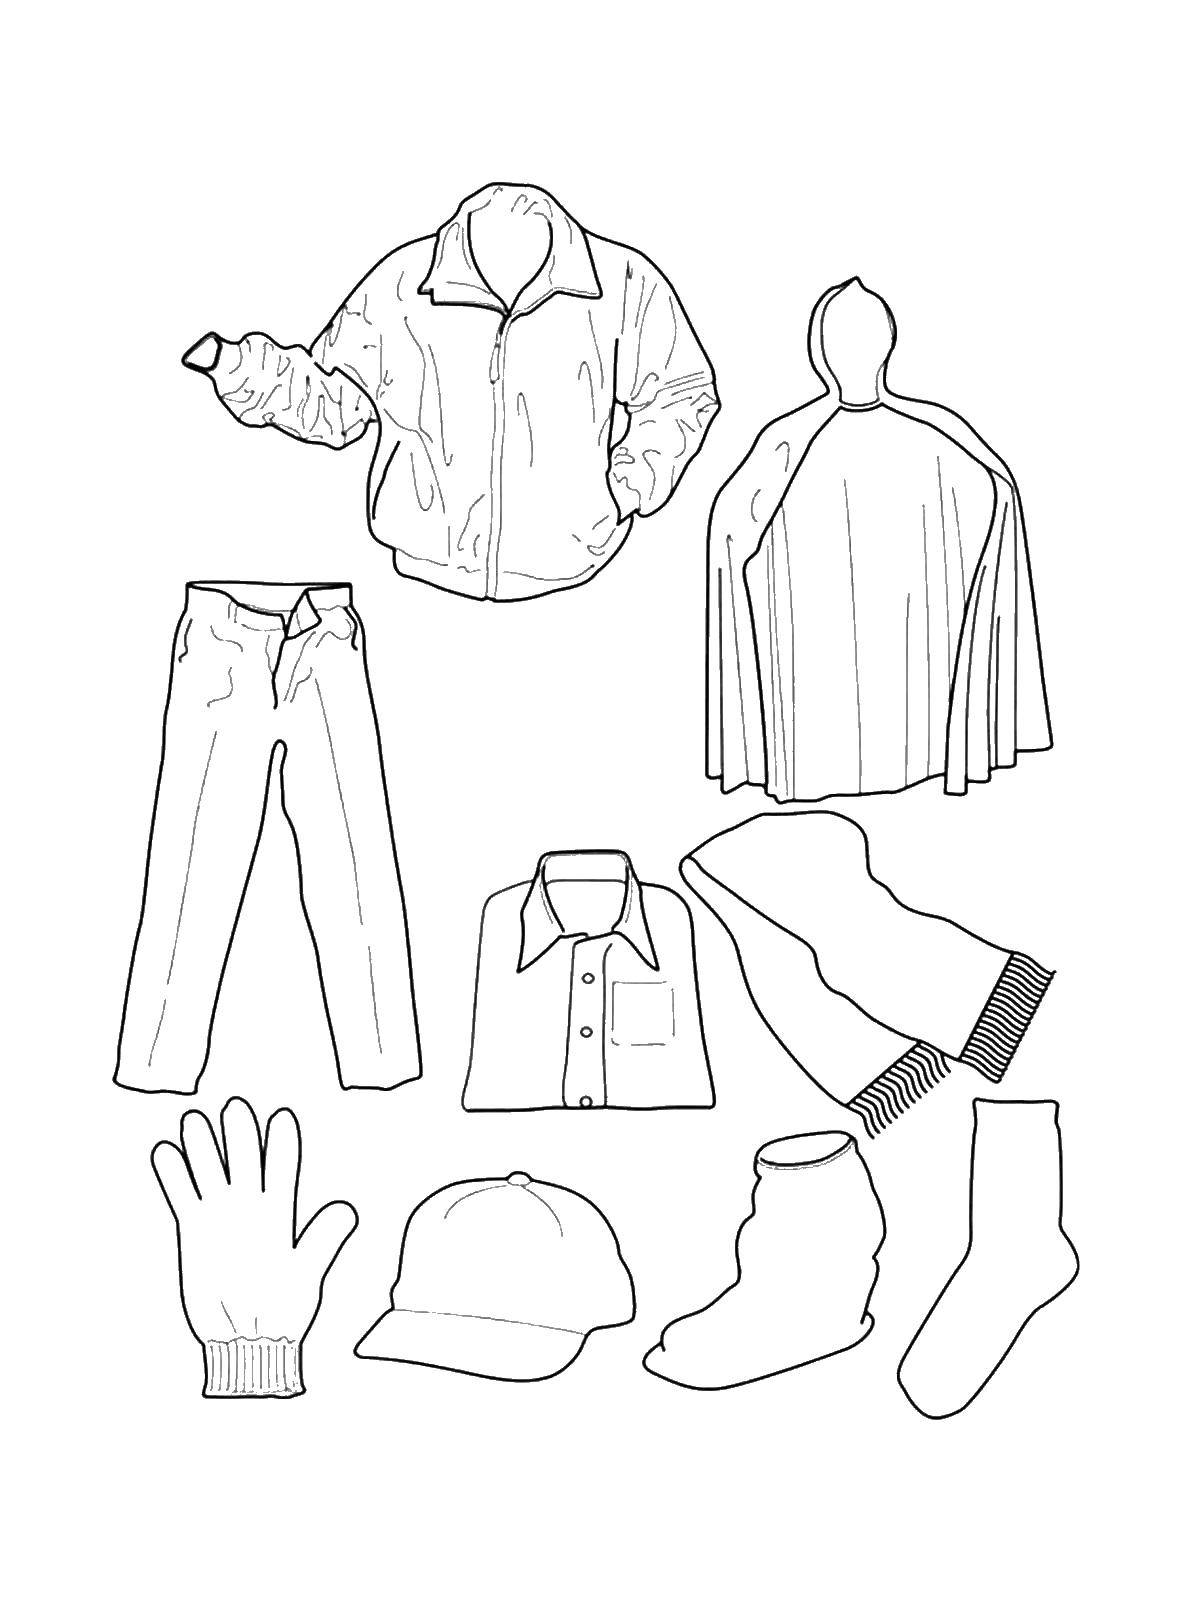 Coloring Set of clothes for coolness. Category clothing. Tags:  Clothing, cool.